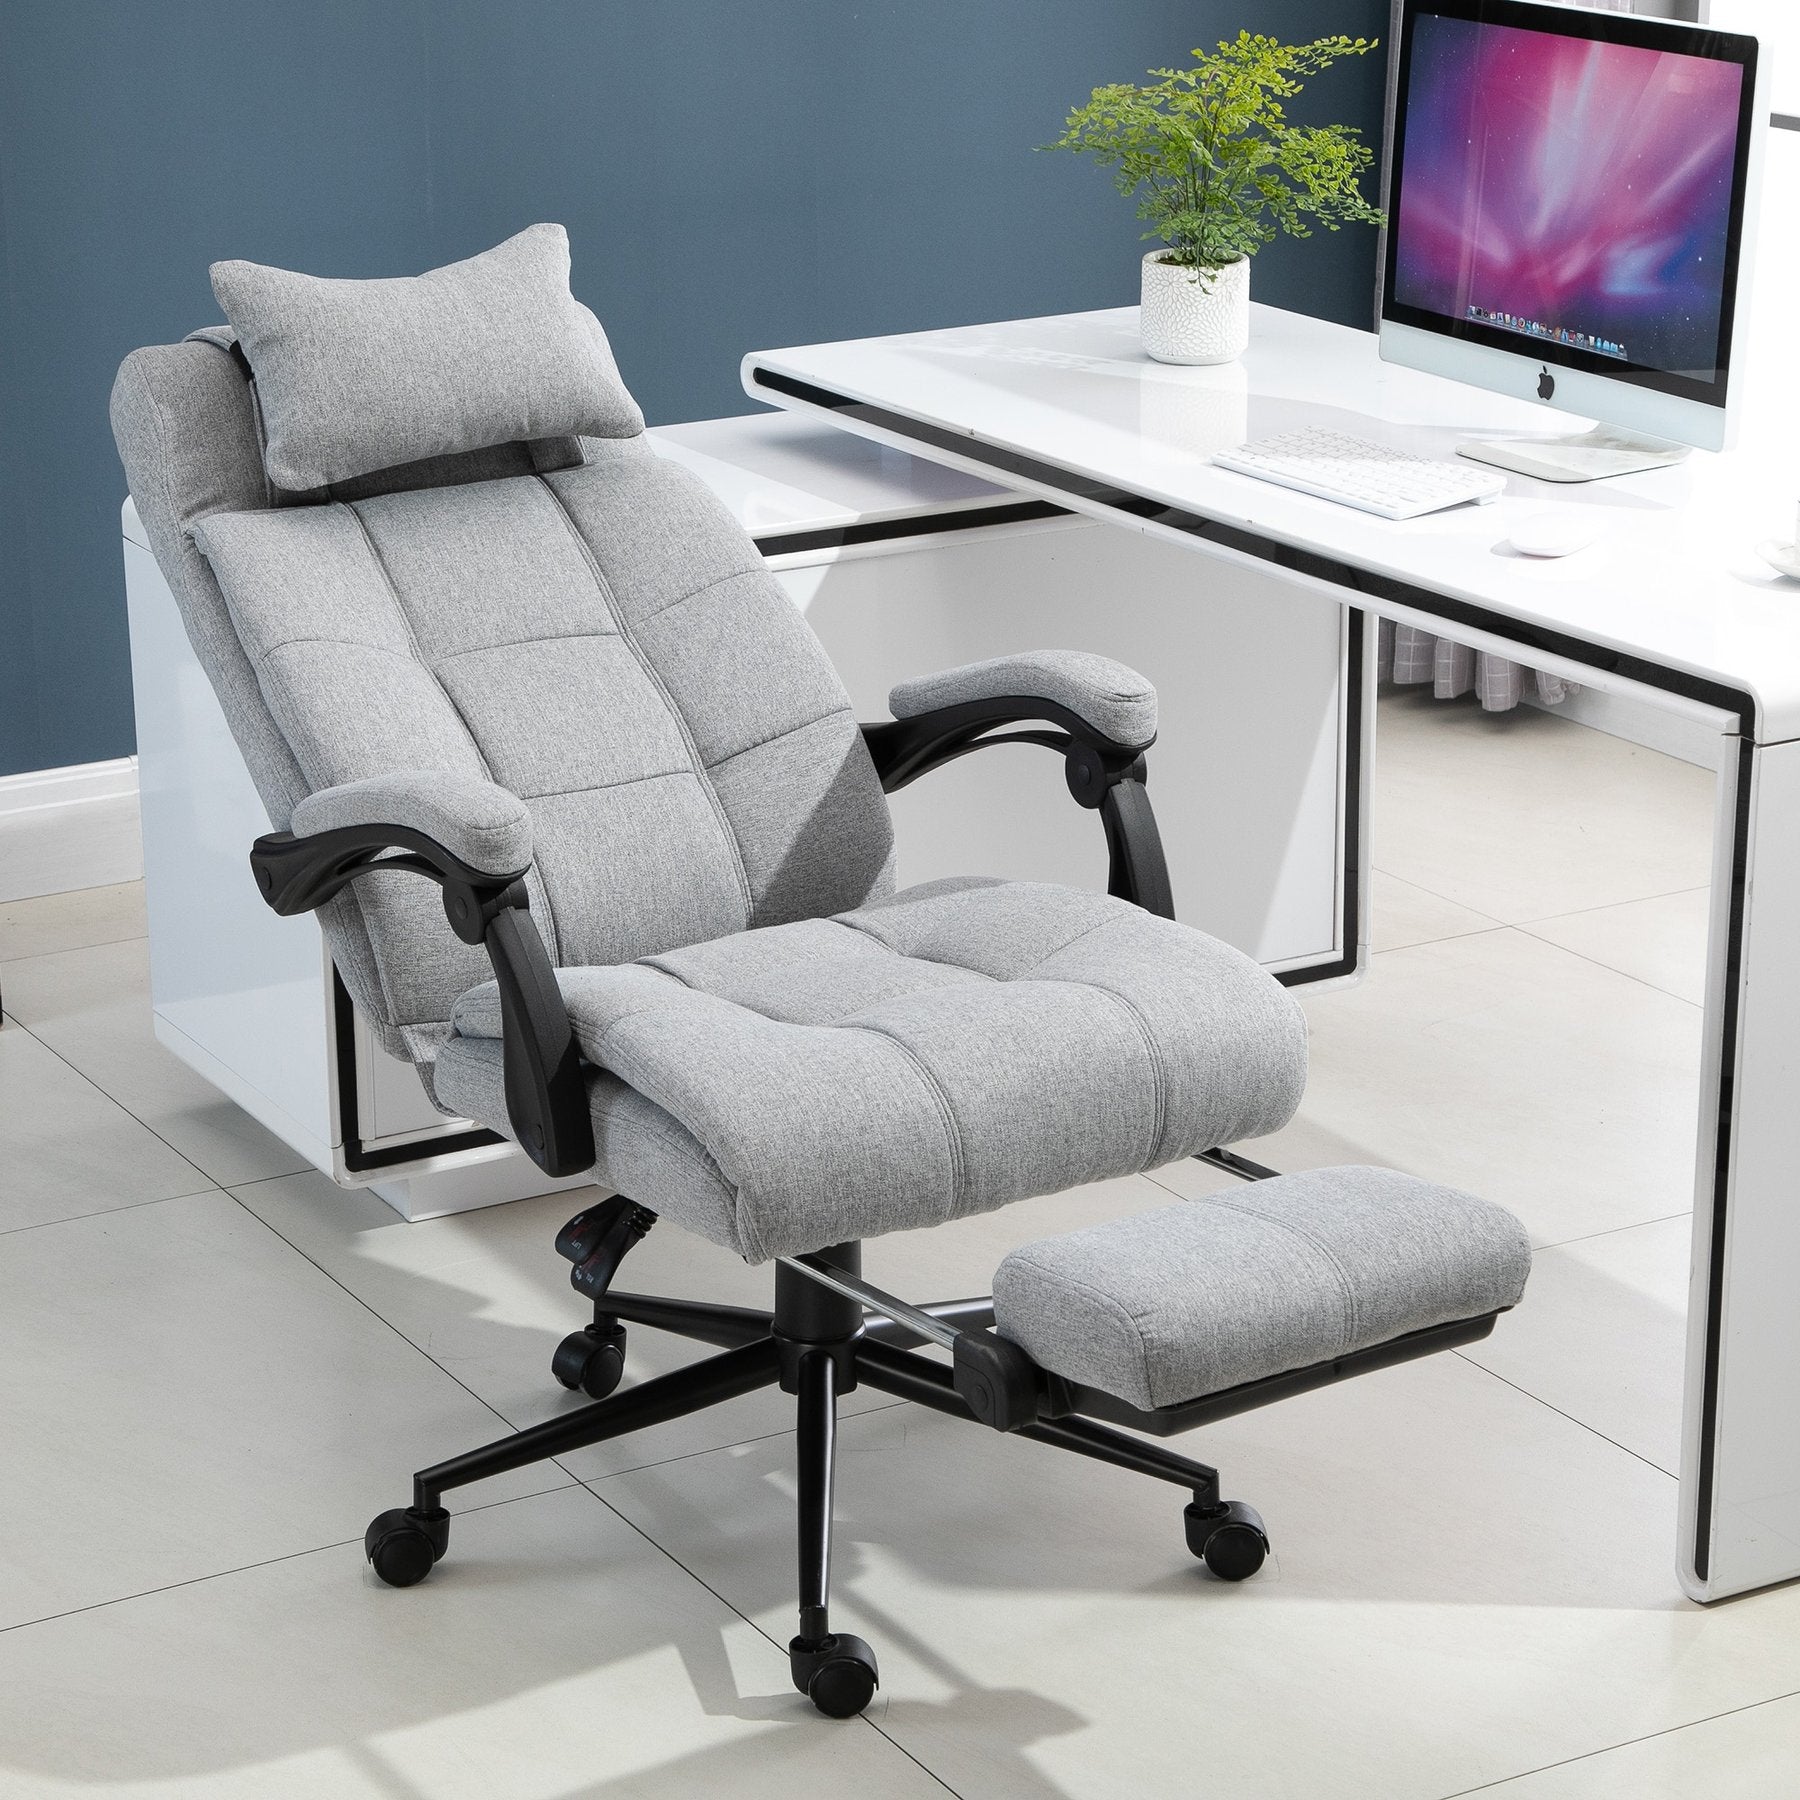 Executive  Home Office Chair with Footrest Headrest and Lumbar Support